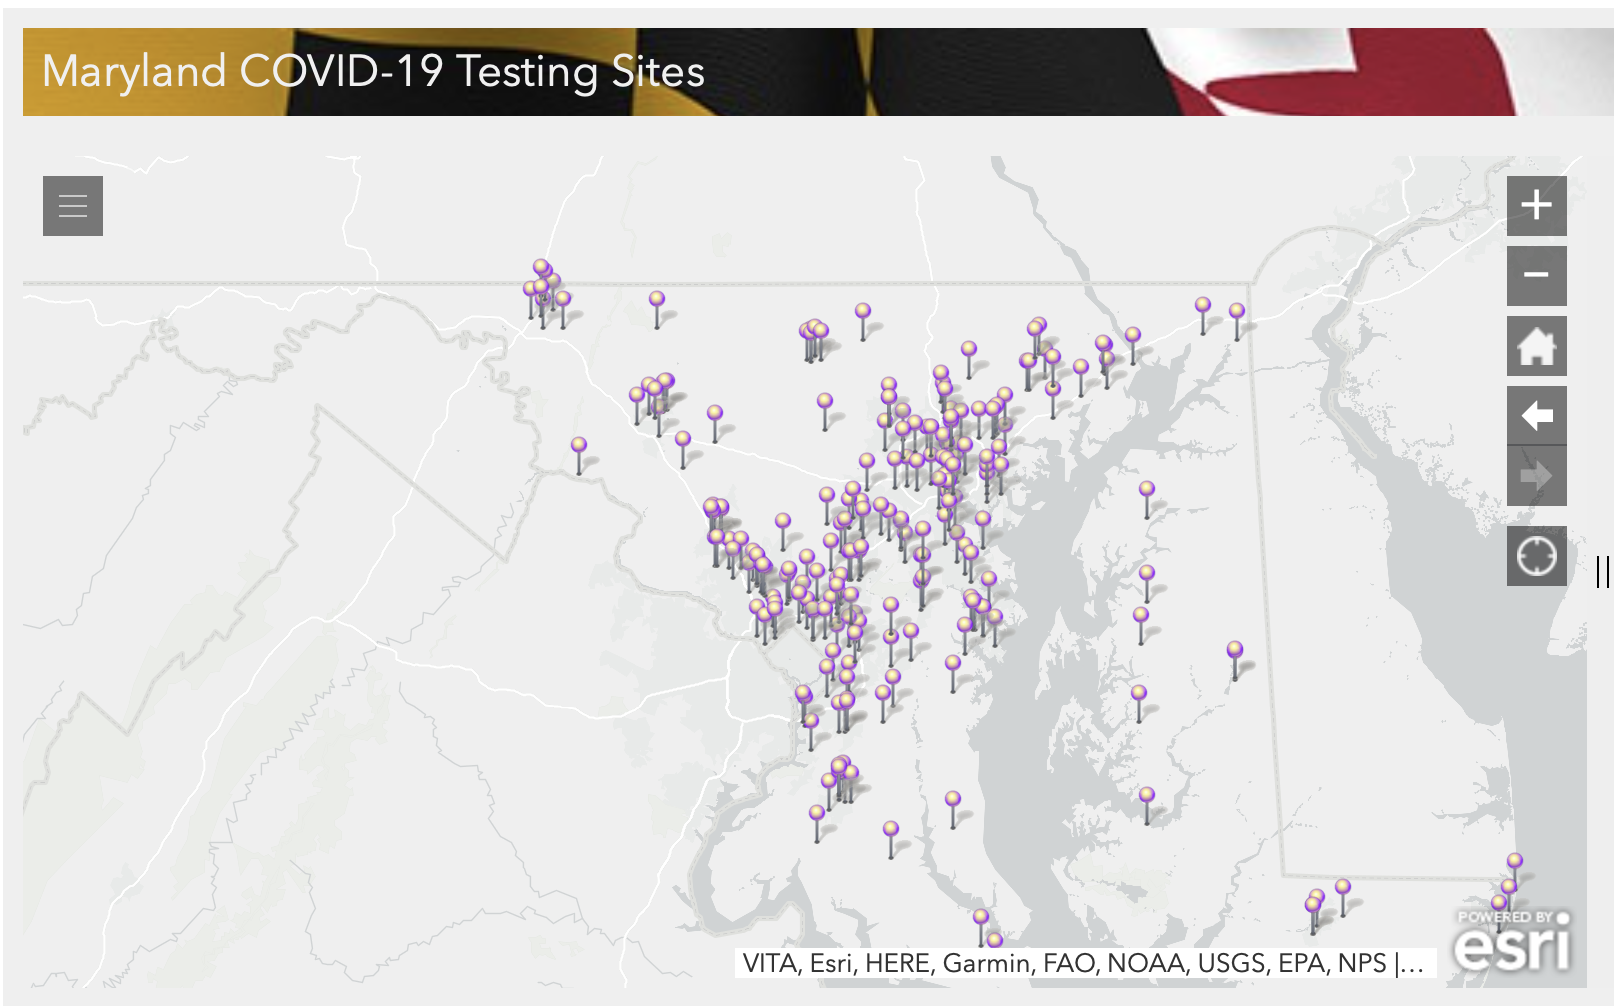 Map of COVID-19 testing sites in Maryland.